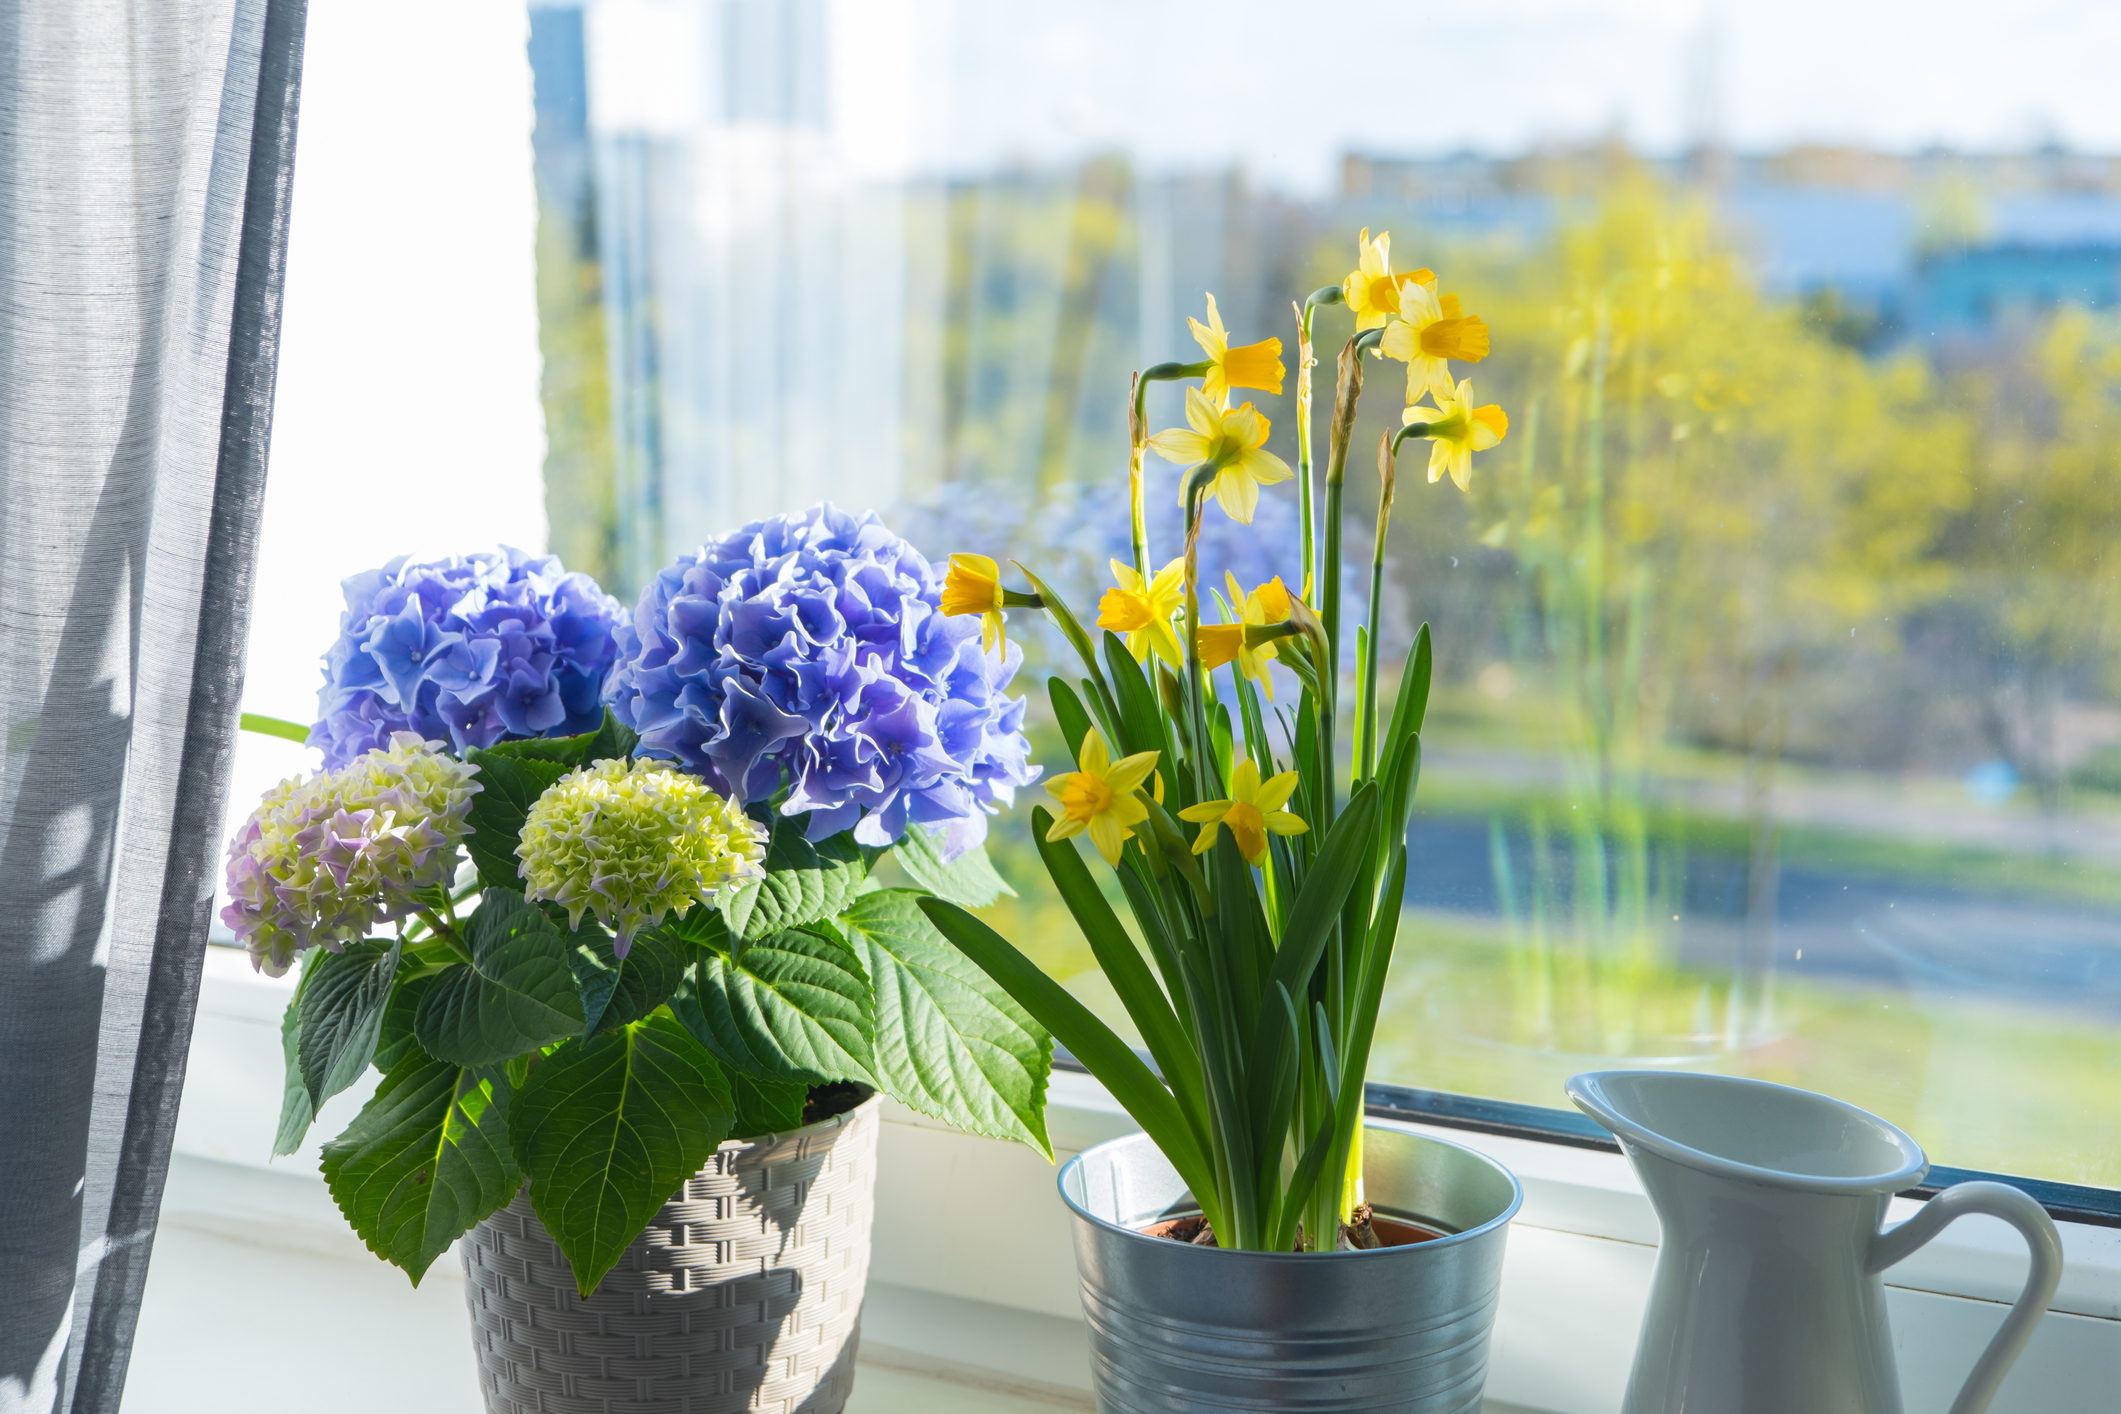 How to Grow Potted Spring Flowers at Home